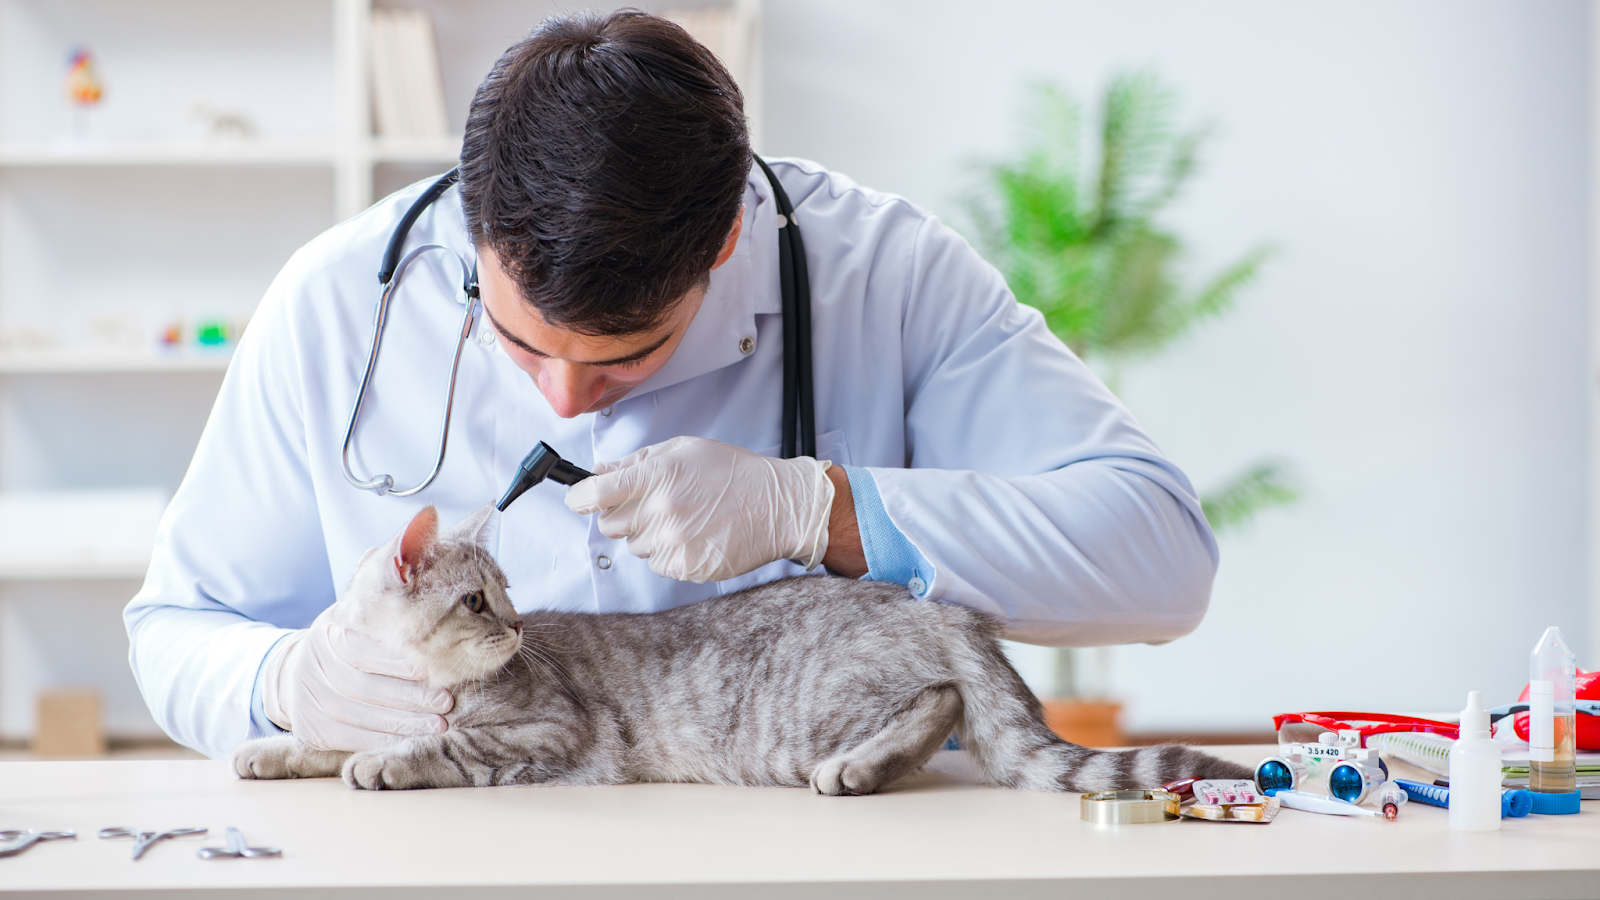 Lethargy, fever and dehydration are just some signs your cat may have Feline Panleukopeia (FPV).